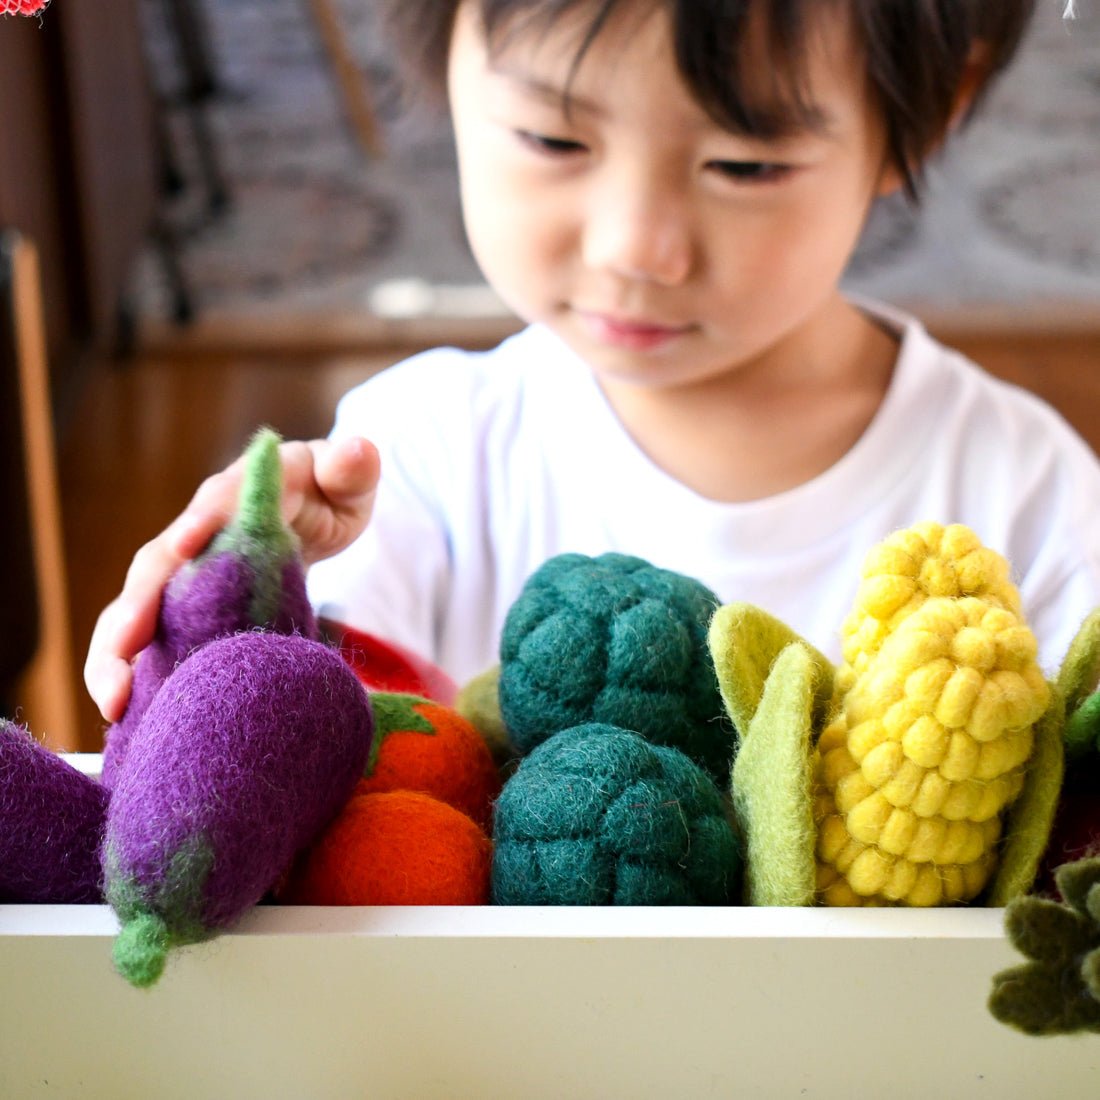 FELT VEGETABLES AND FRUITS - SET B (11 PIECES) by TARA TREASURES - The Playful Collective